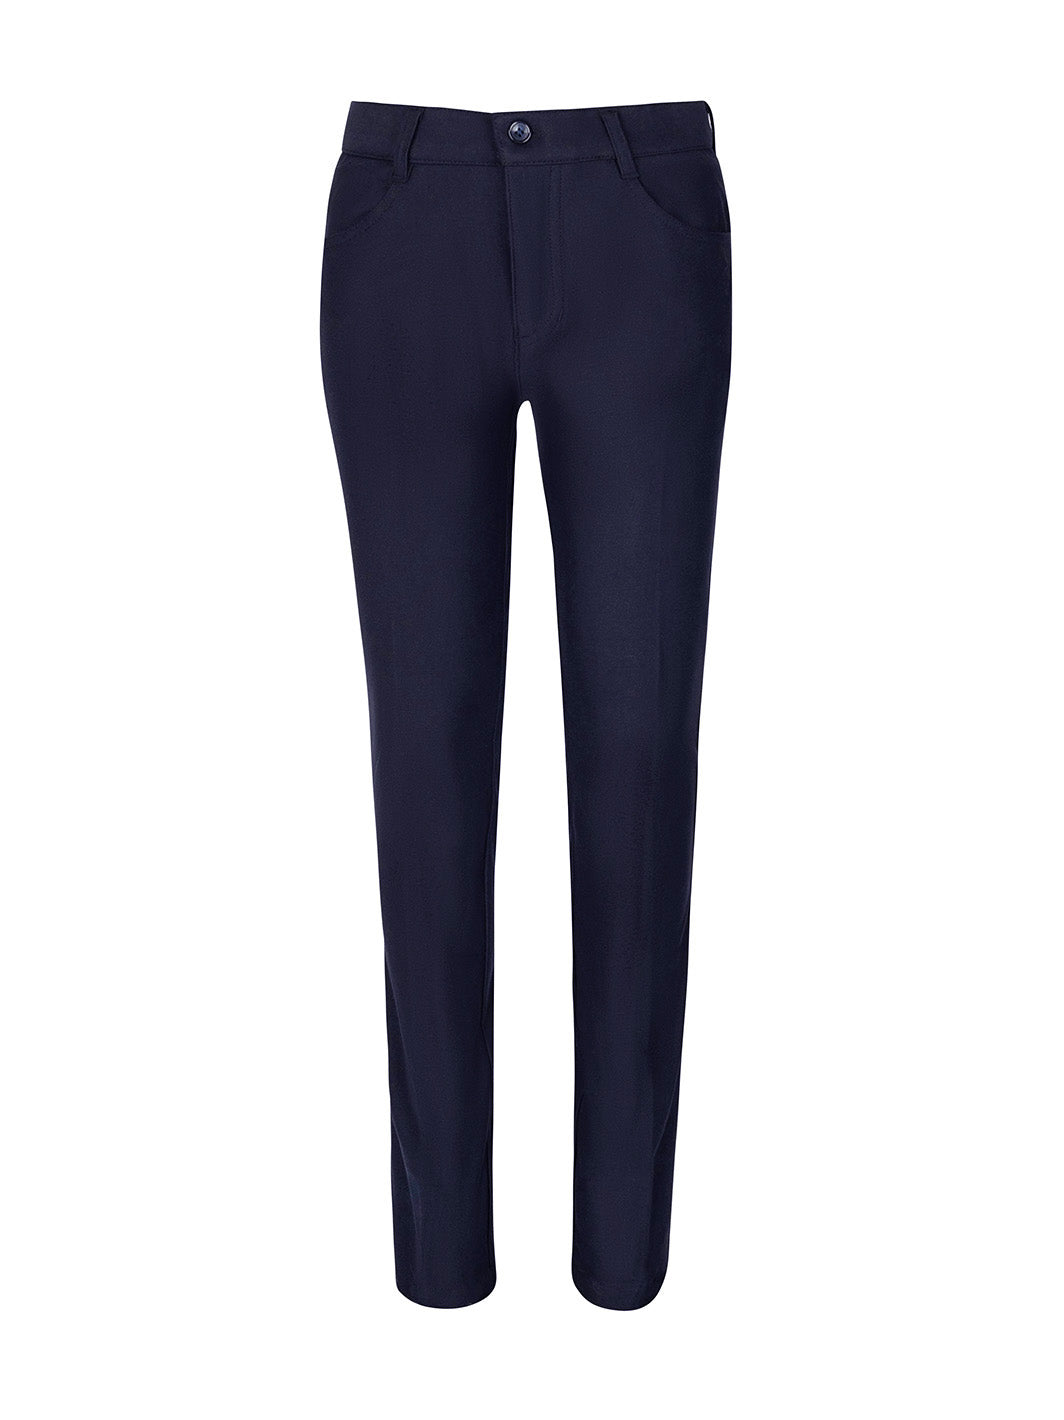 Casual Five Pocket Style Stretch Pants